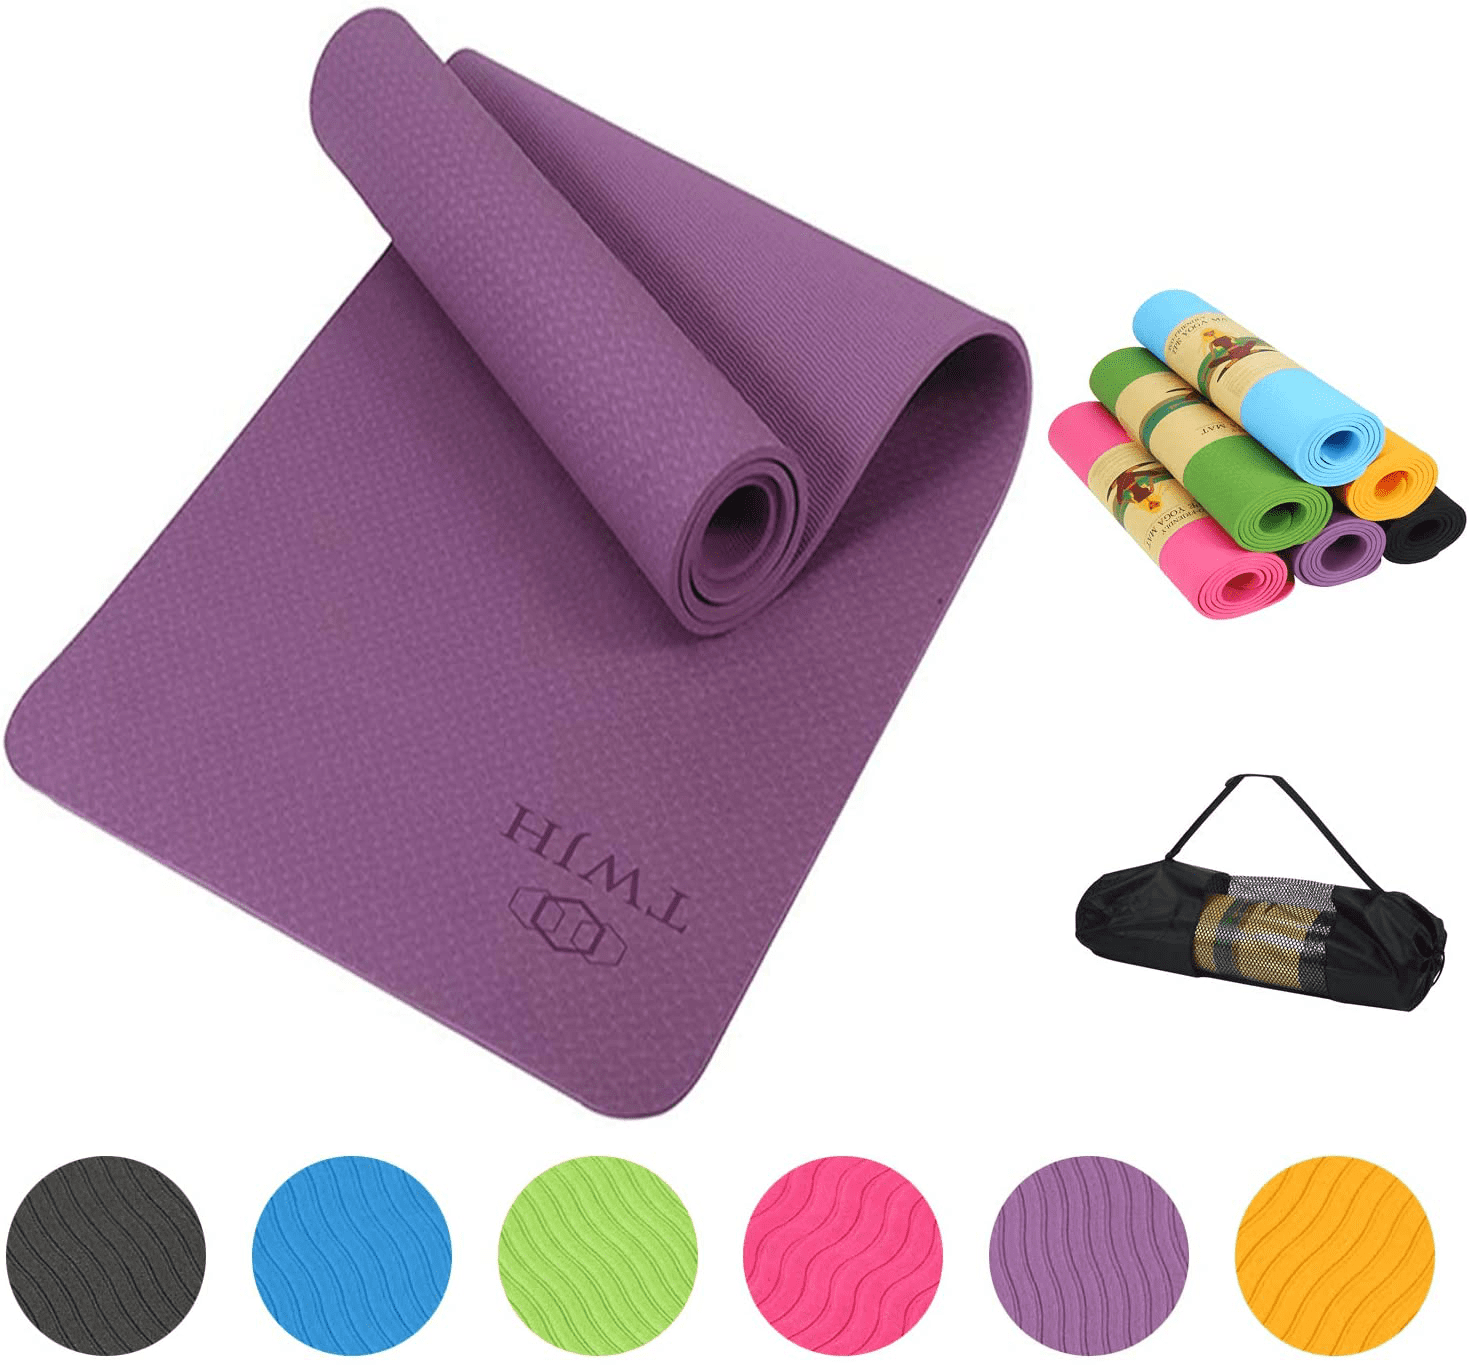 TWJH Thick Yoga Mat Classic 8mm Thick Yoga Mat Non-Slip Exercise & Fitness Mat with Carrying Strap，for All Types of Yoga Exercise and Pilates 72 x 24 x 1/3 Inch Thick 